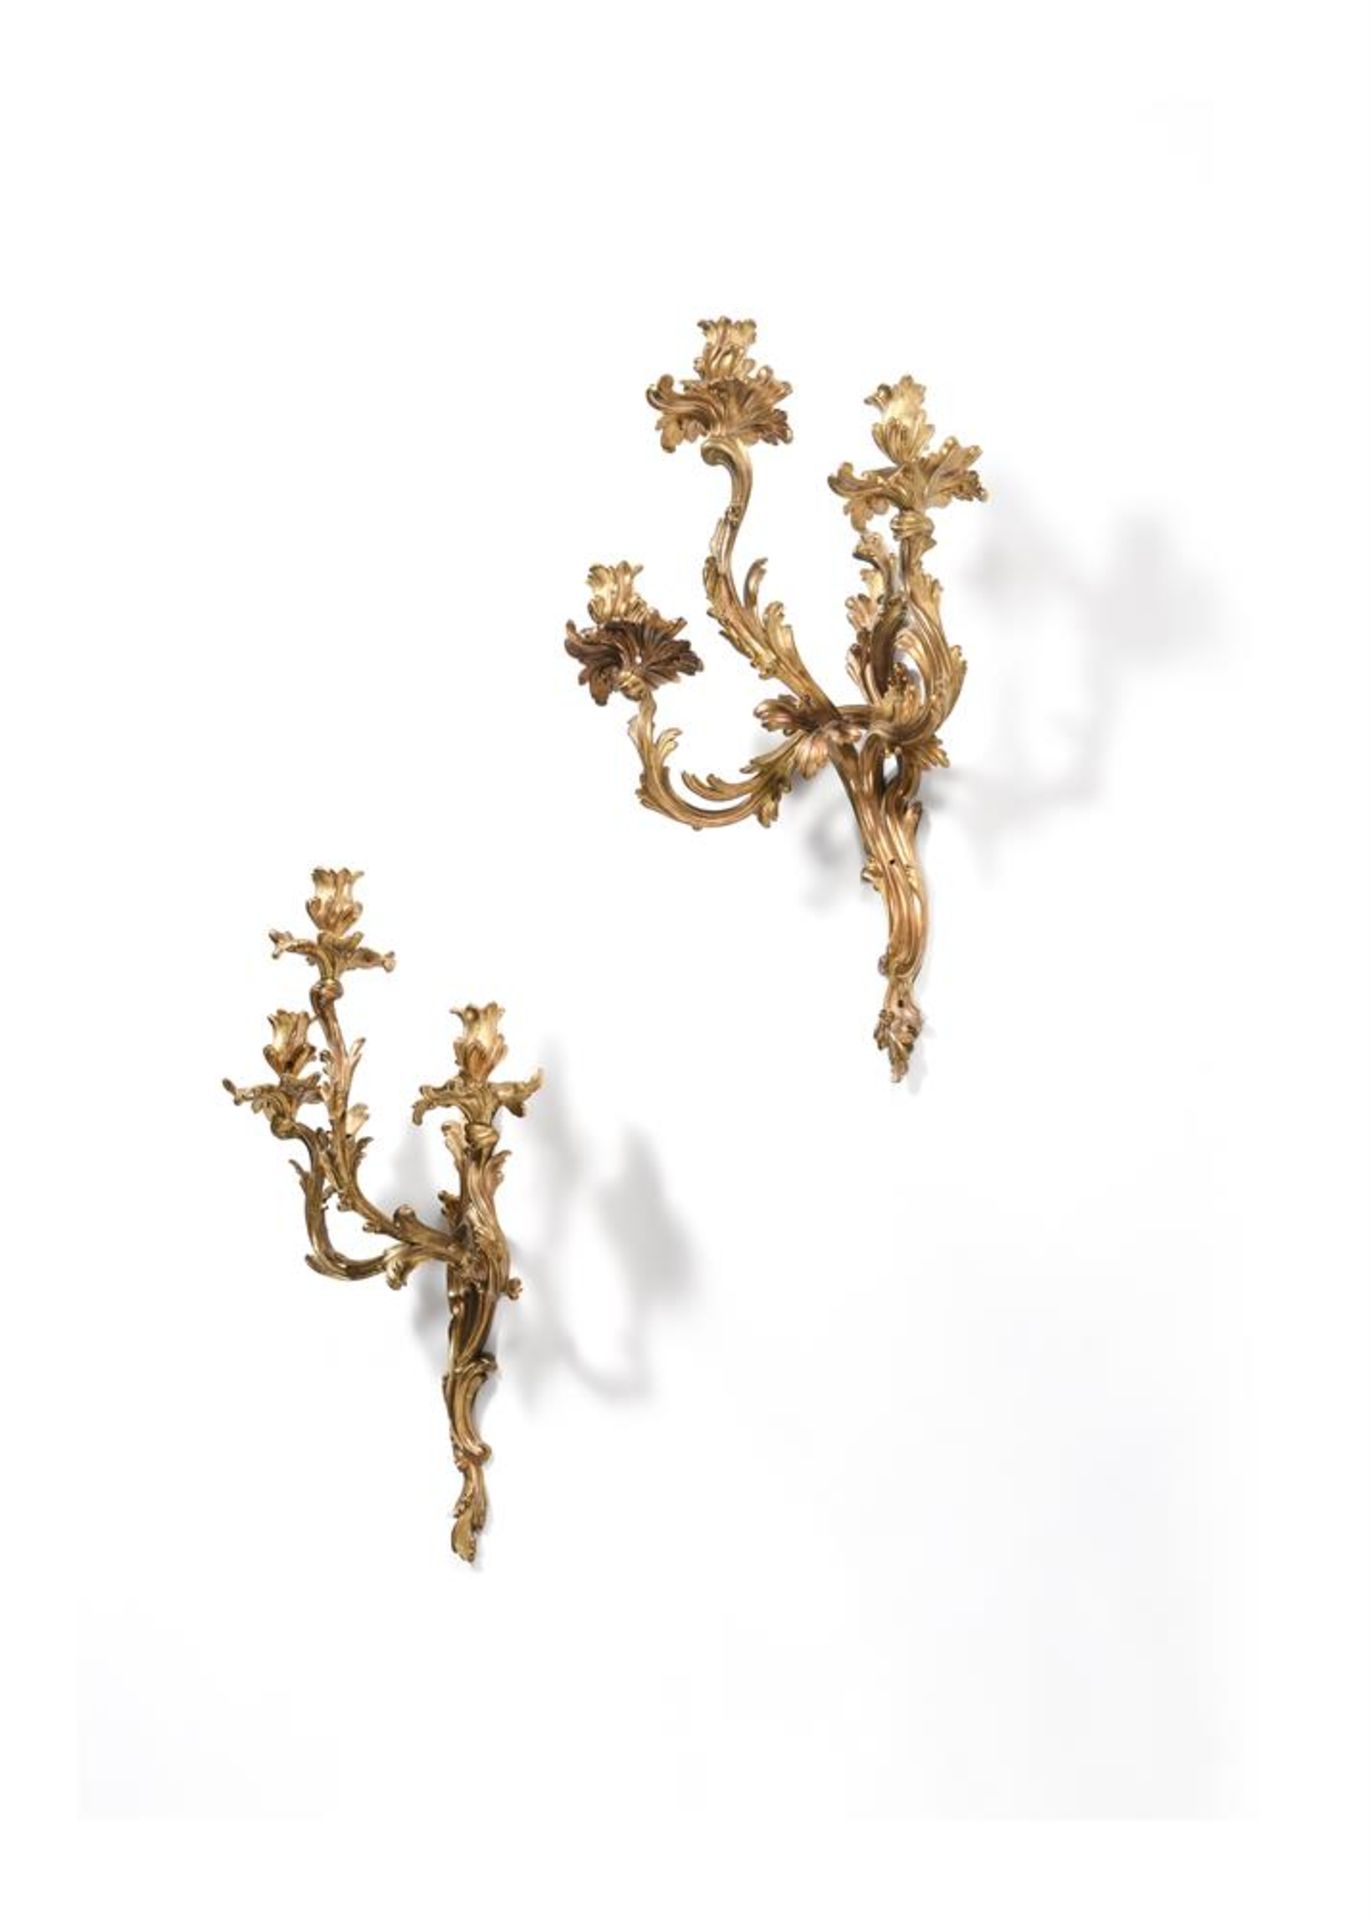 A LARGE PAIR OF FRENCH ORMOLU WALL LIGHTS, 18TH OR 19TH CENTURY - Image 2 of 2